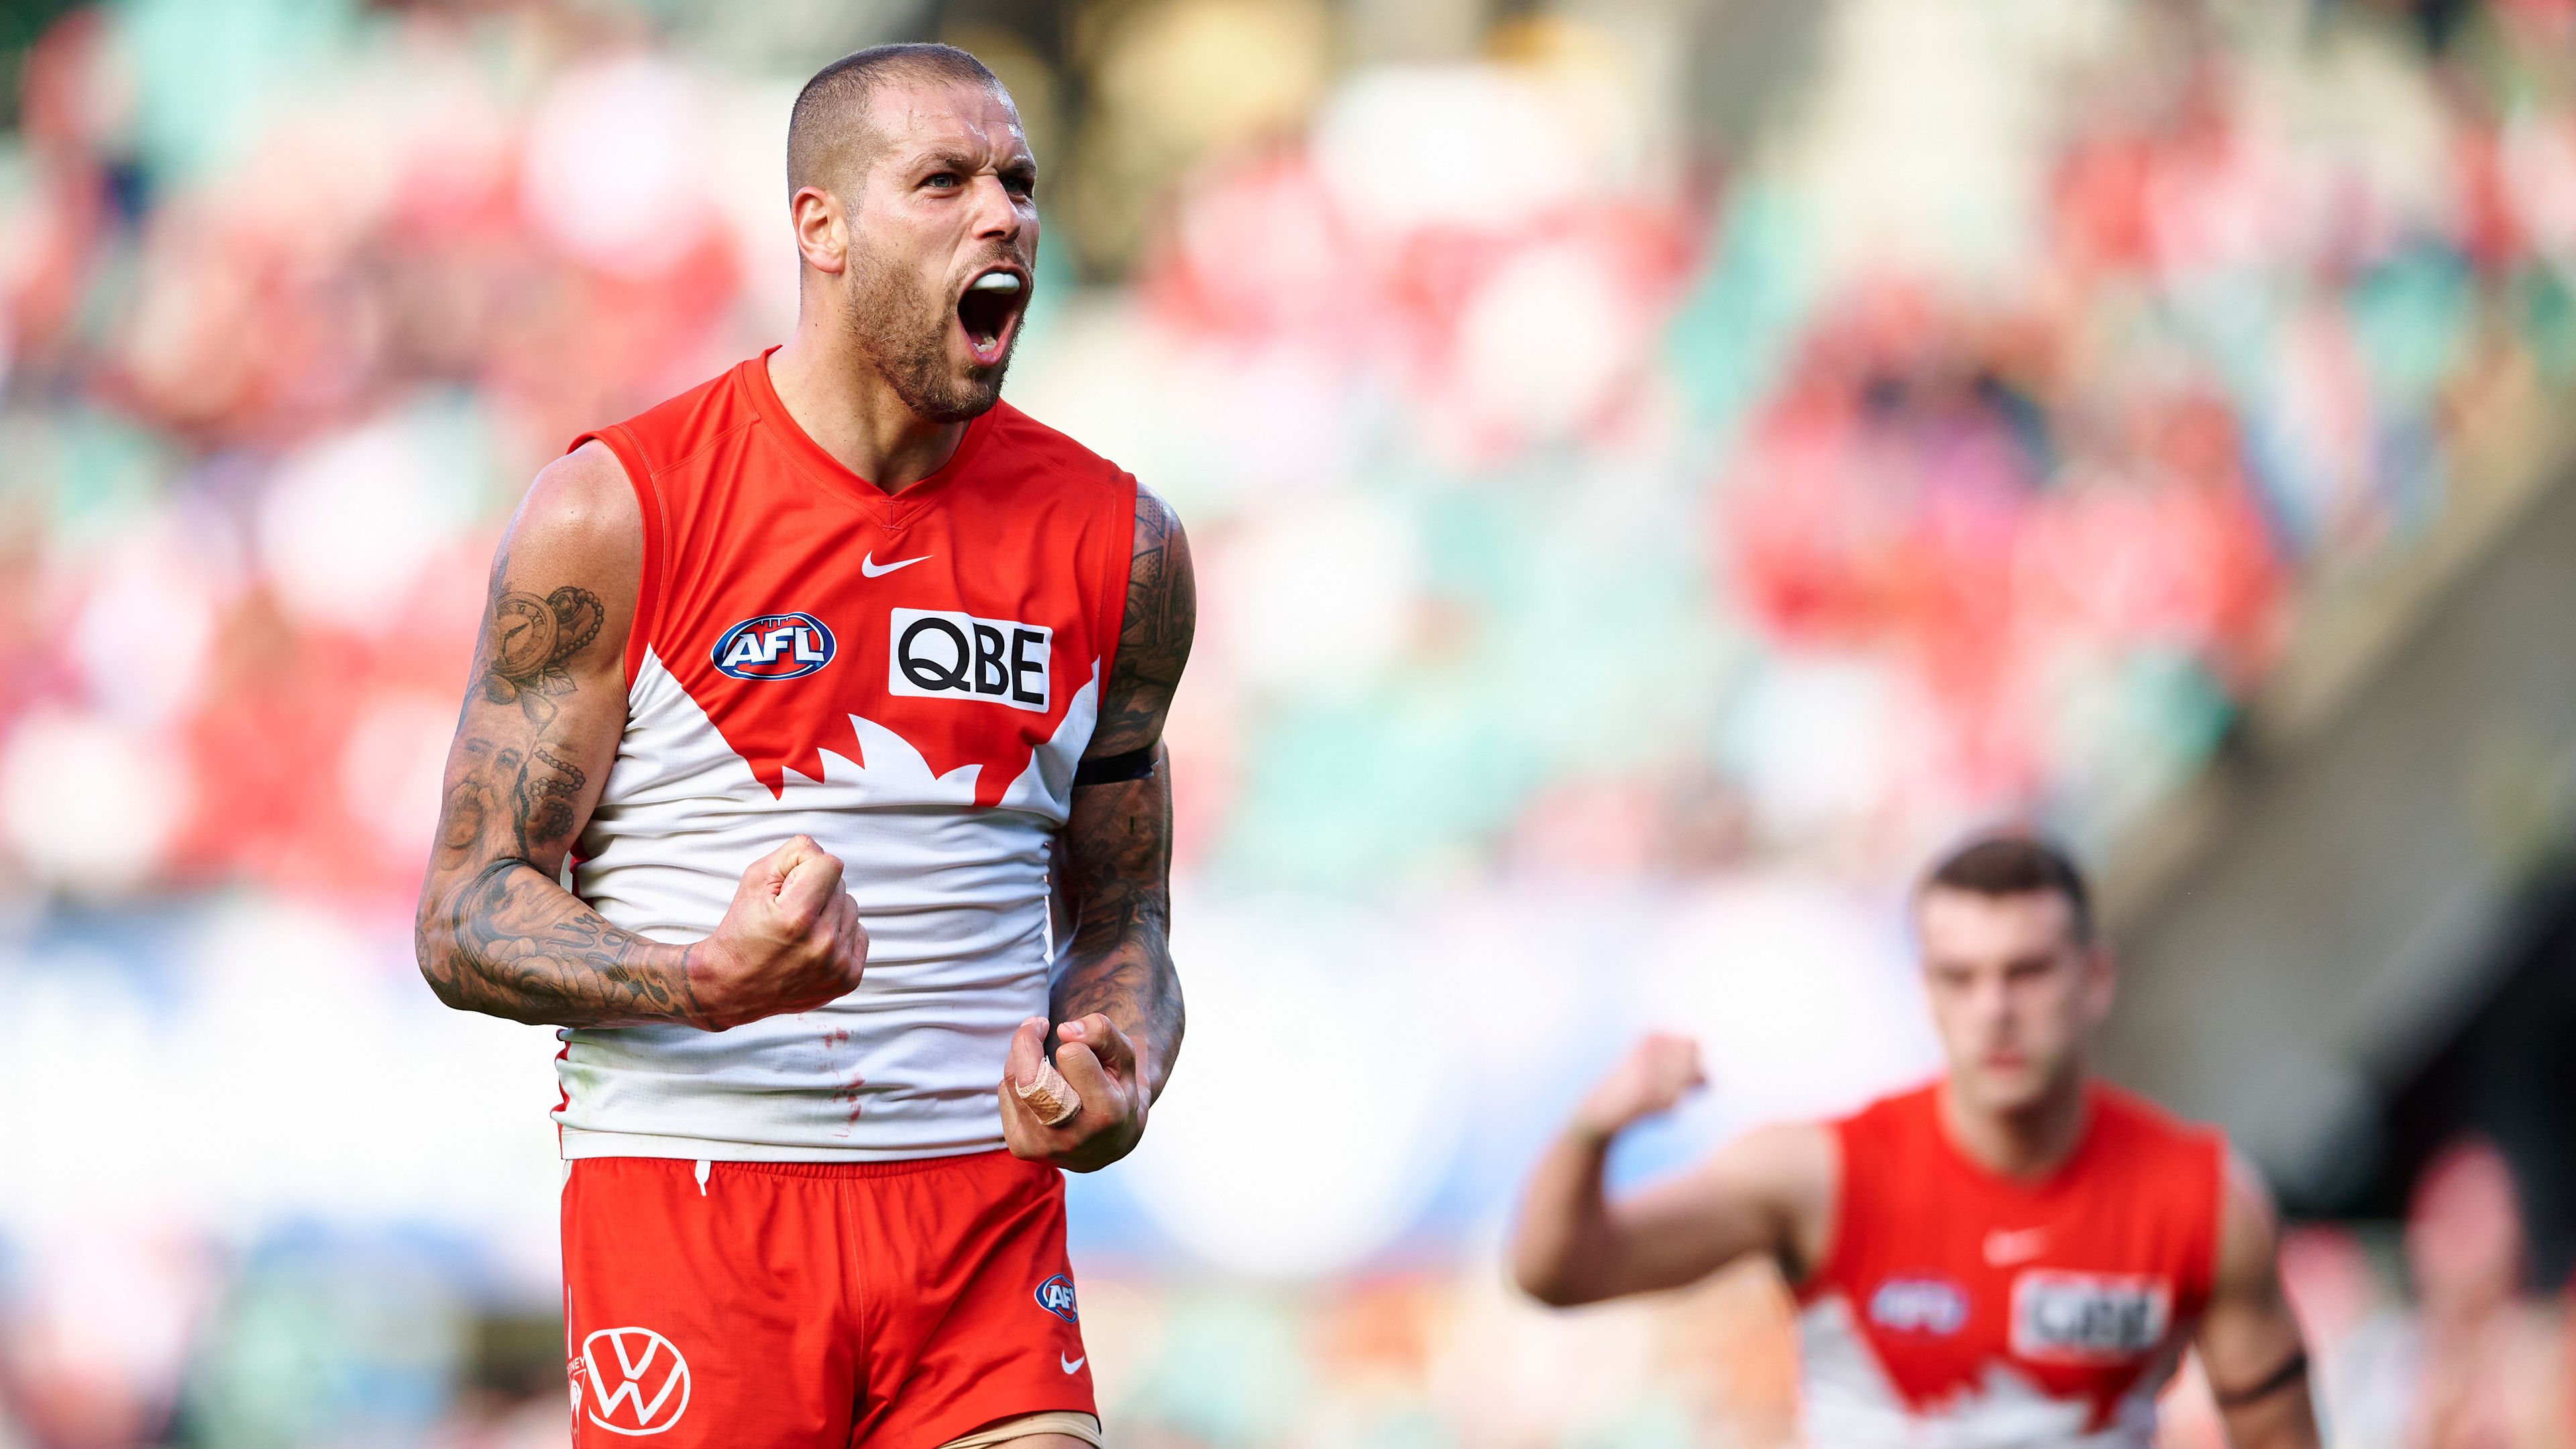 Lance Franklin moves kicks past Garry Ablett Snr as Swans down Crows